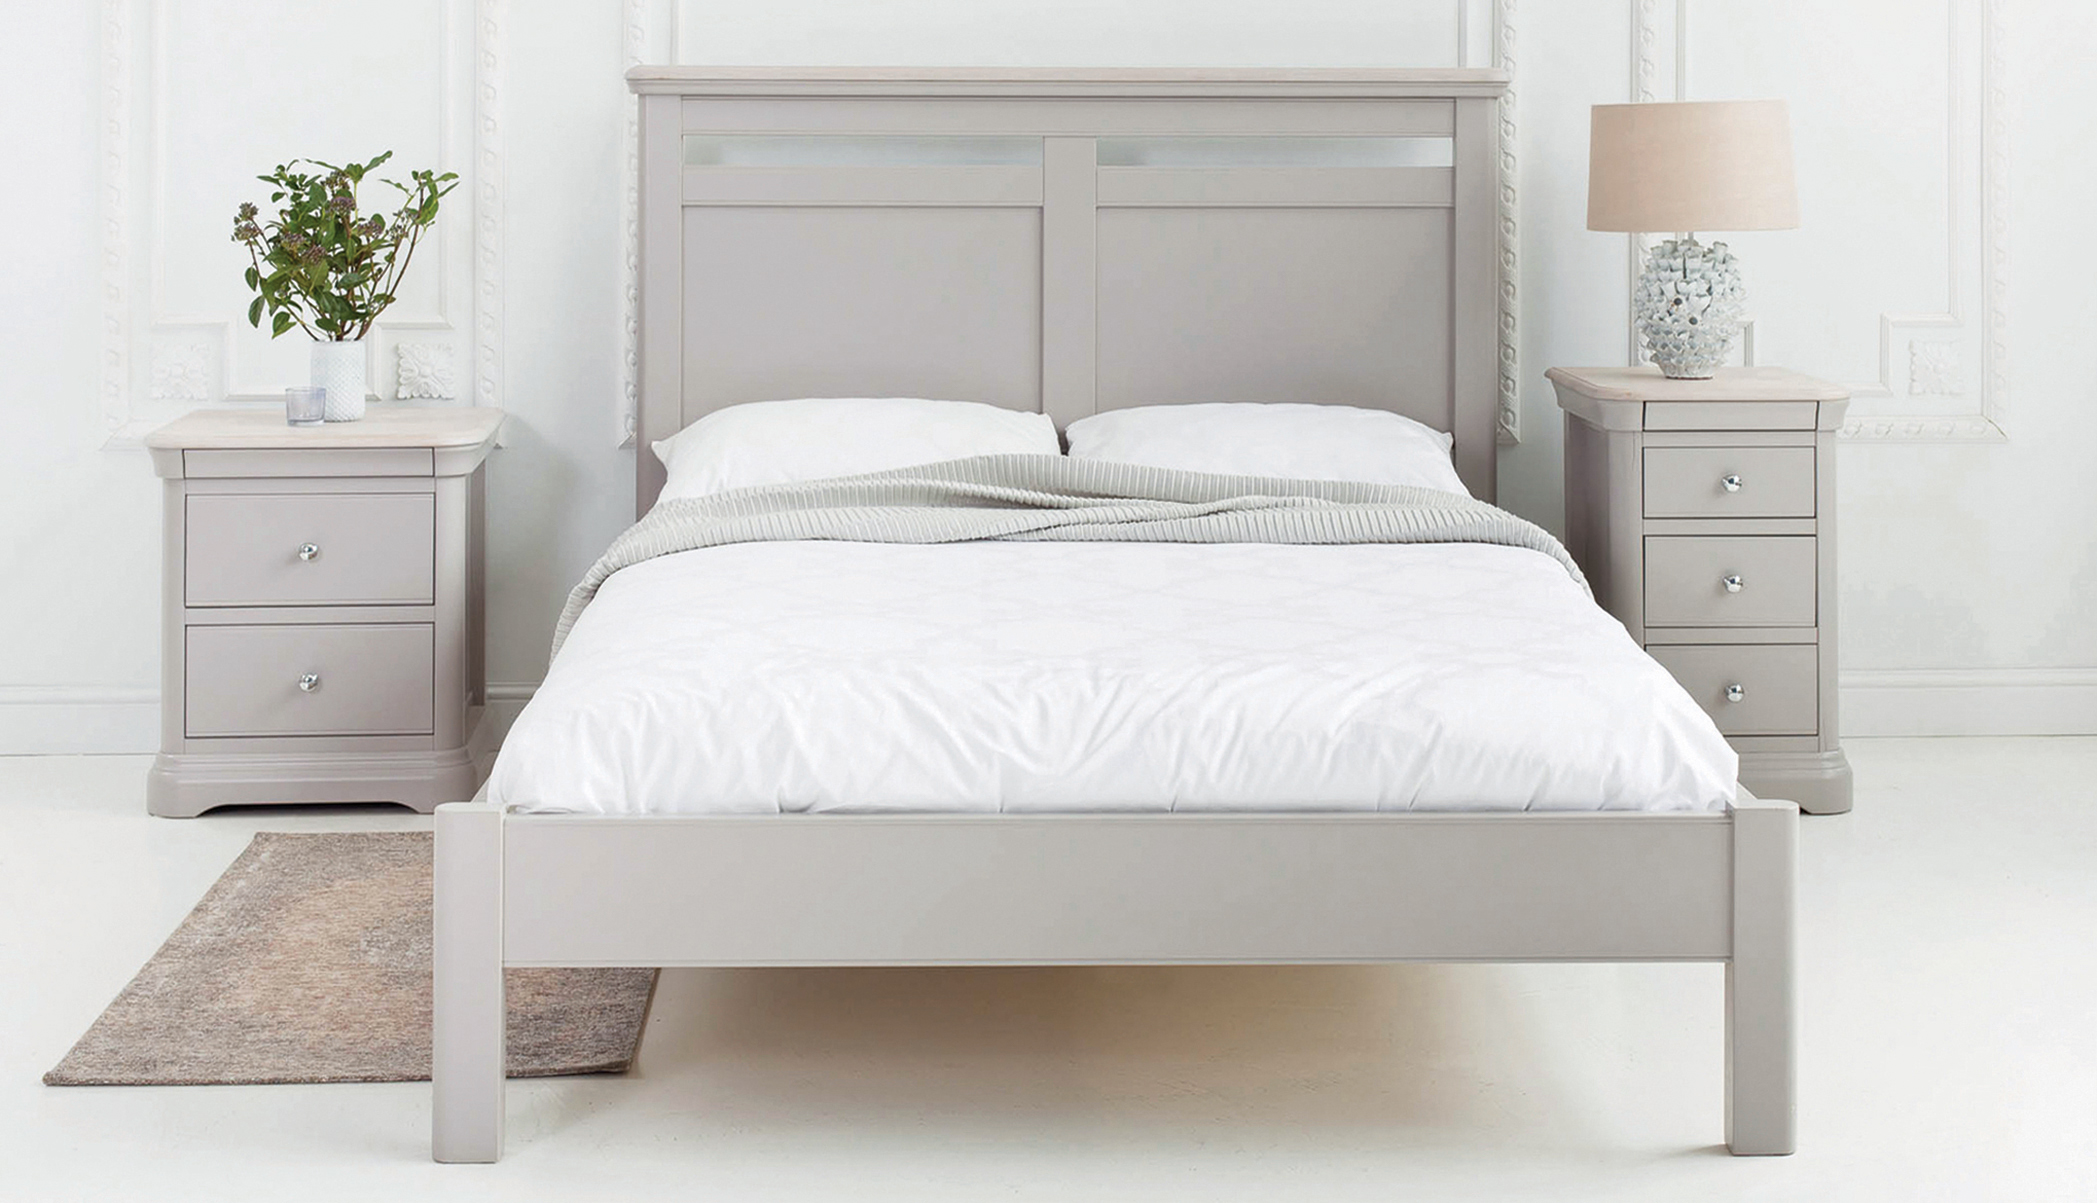 tch cromwell bedroom furniture